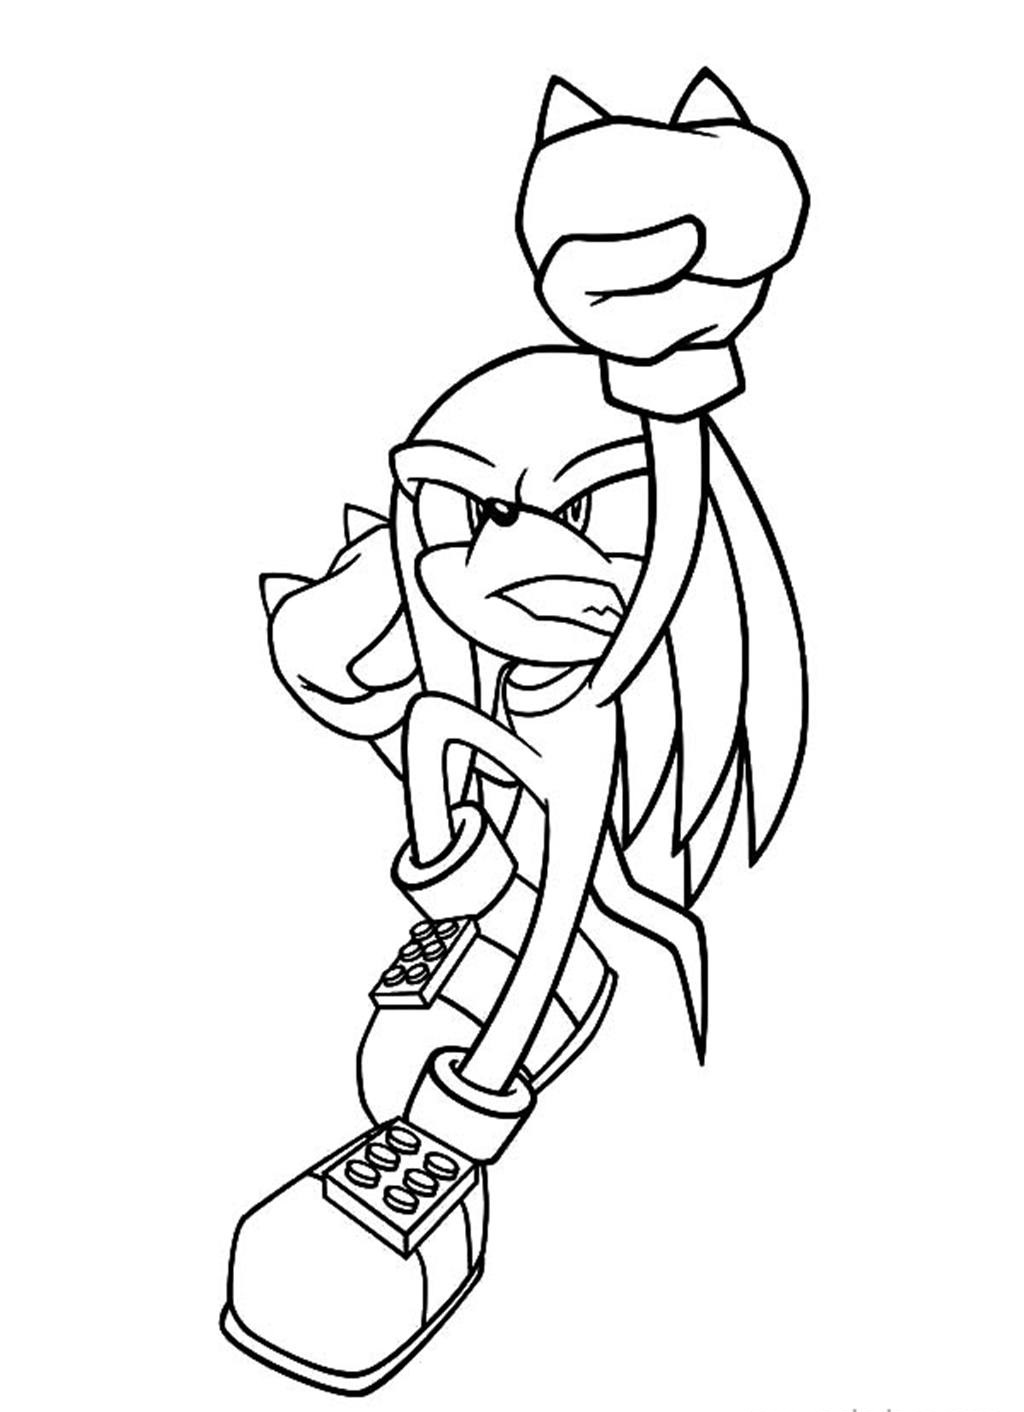 SEGA Knuckles The Echidna Coloring Pages